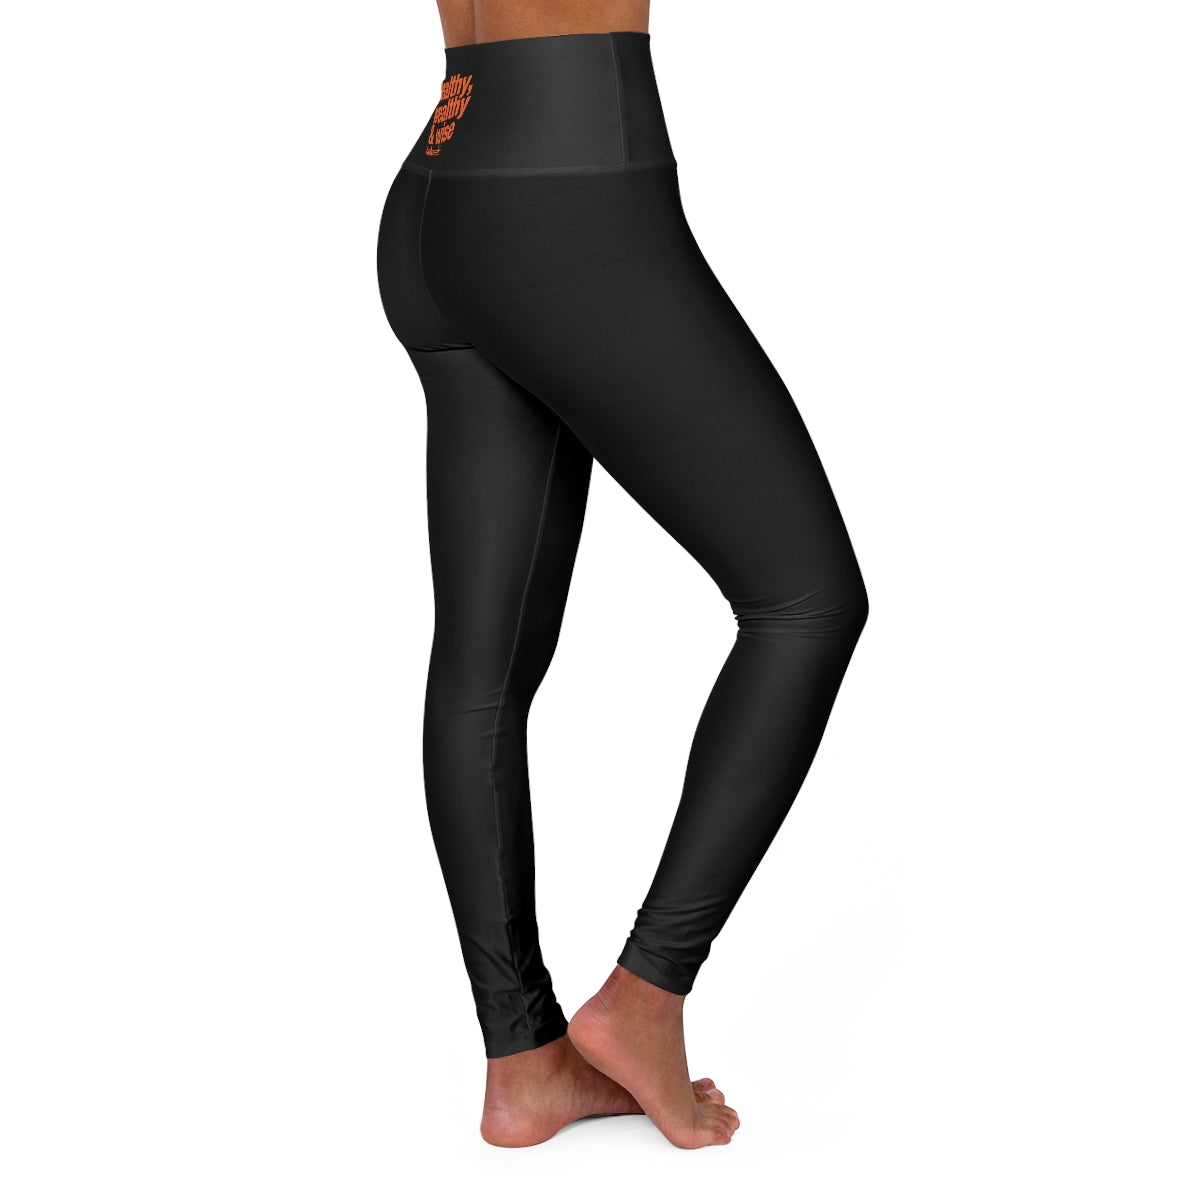 healthy, wealthy & wise High Waisted Yoga Leggings